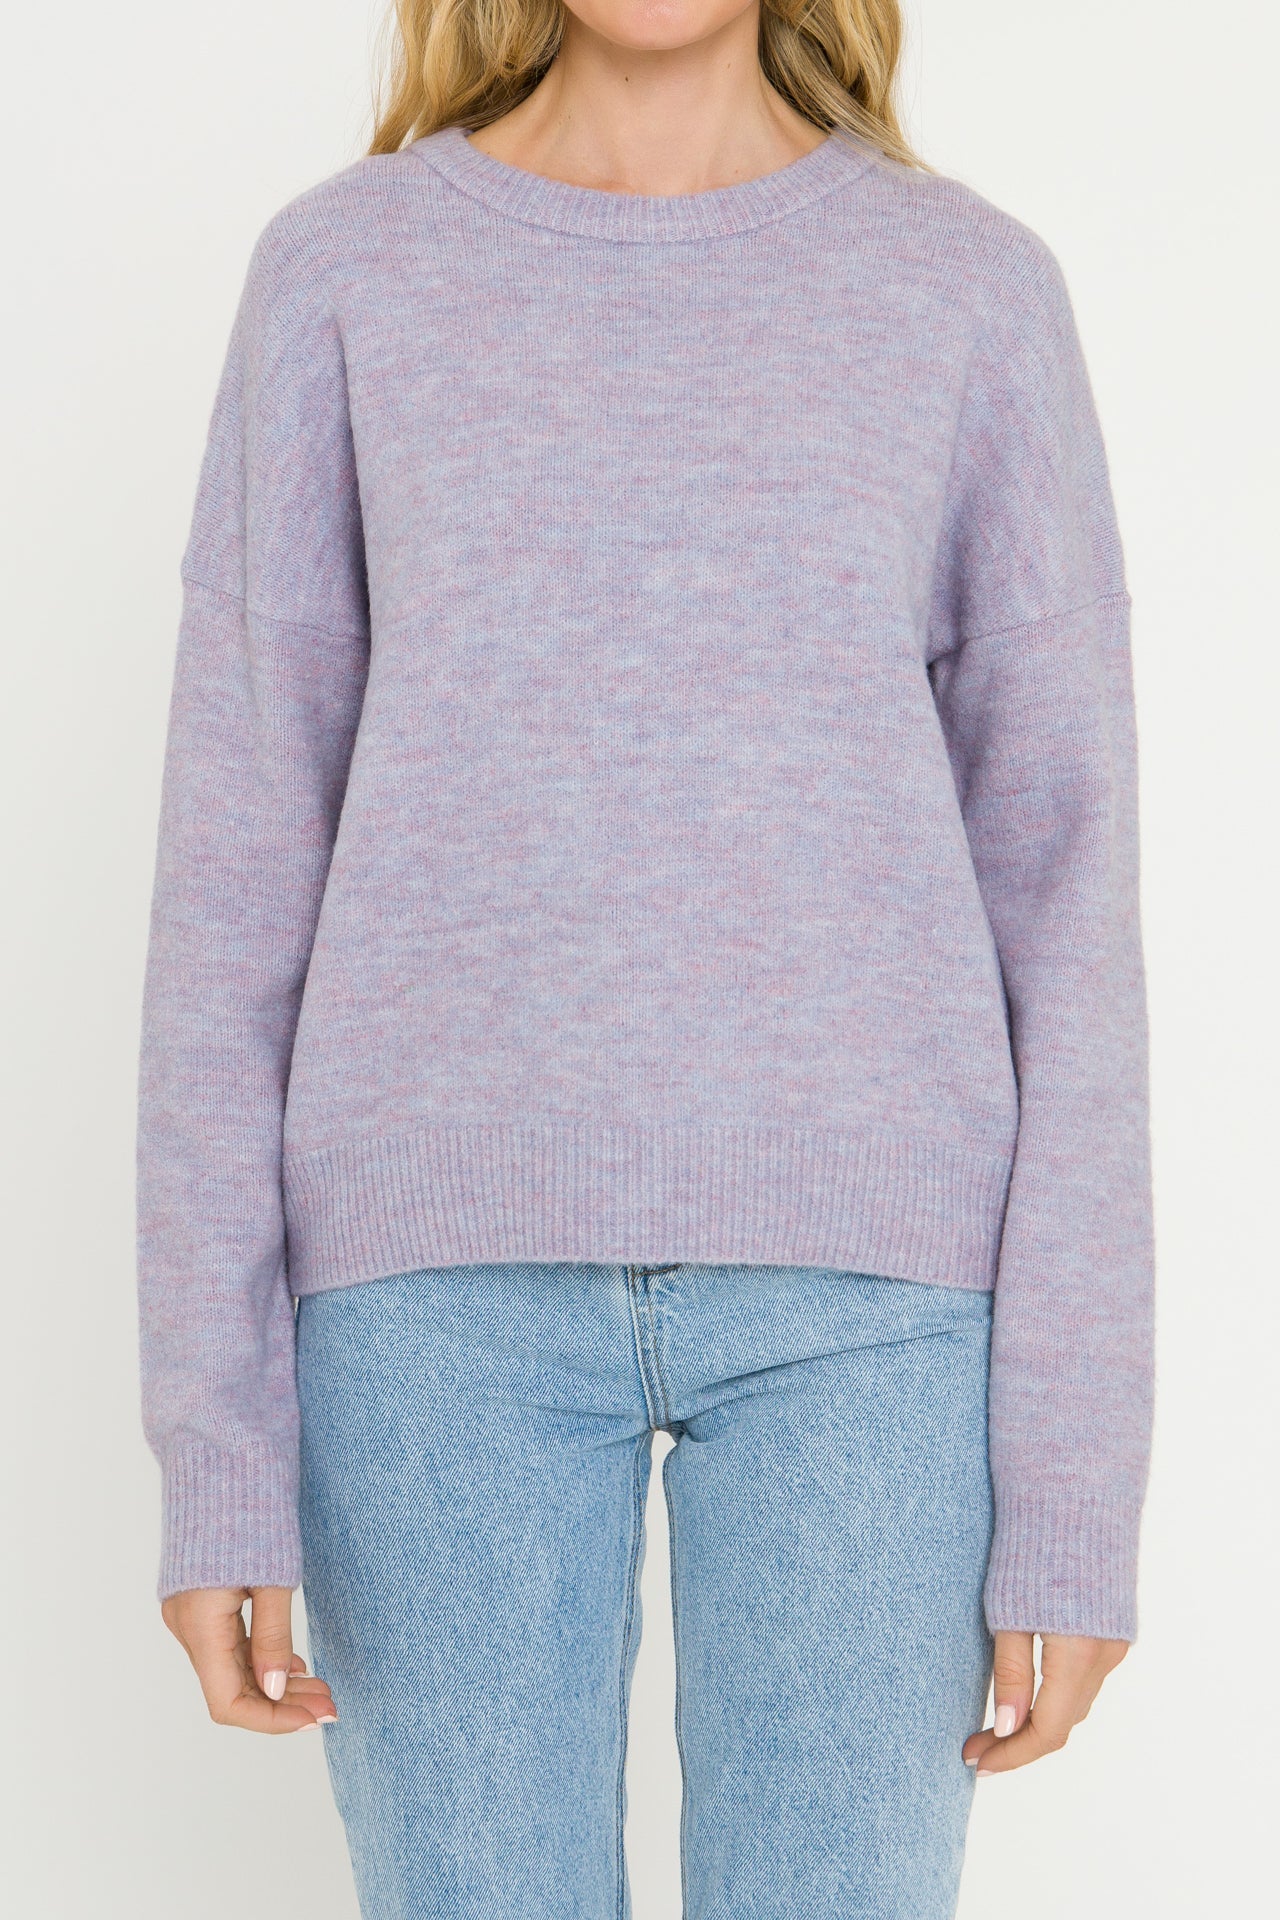 FREE THE ROSES - Round Neck Sweater - SWEATERS & KNITS available at Objectrare